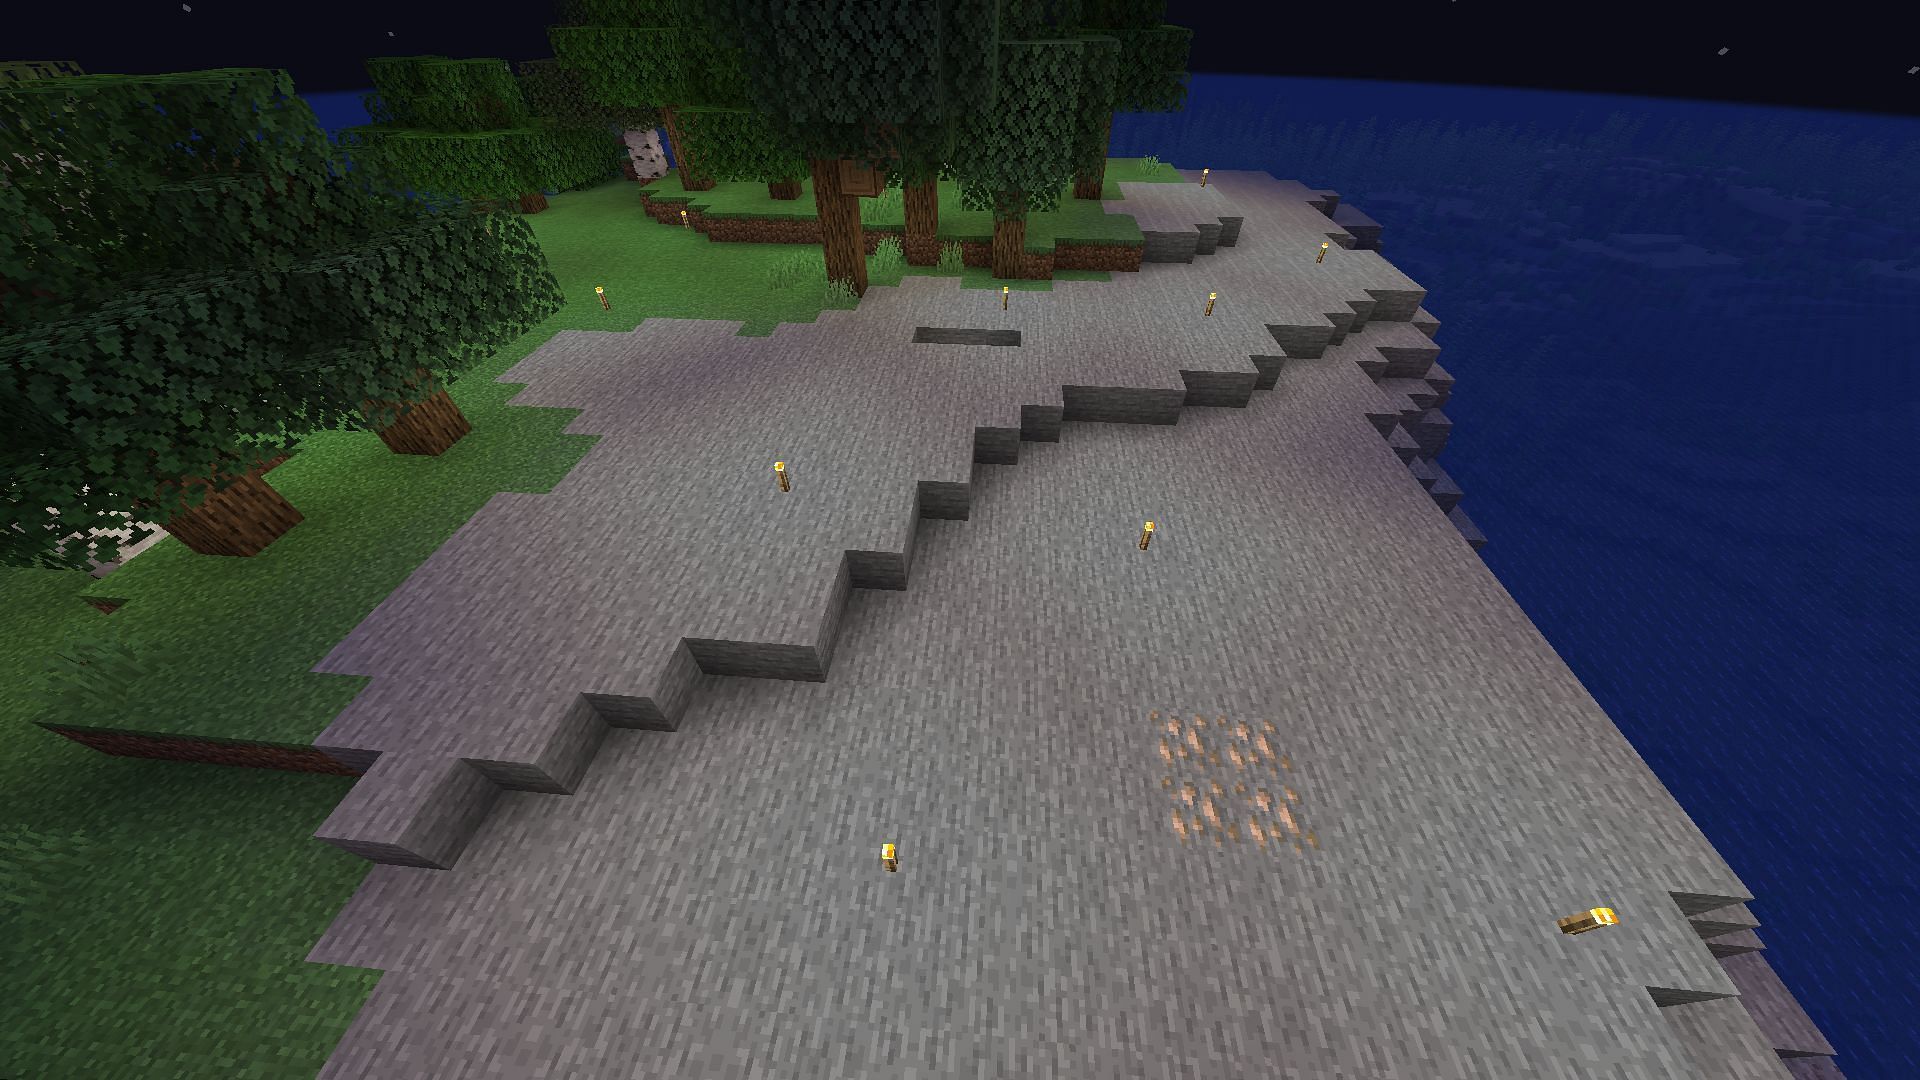 Players can also spawn-proof the entire island to make it safer in Minecraft (Image via Mojang)